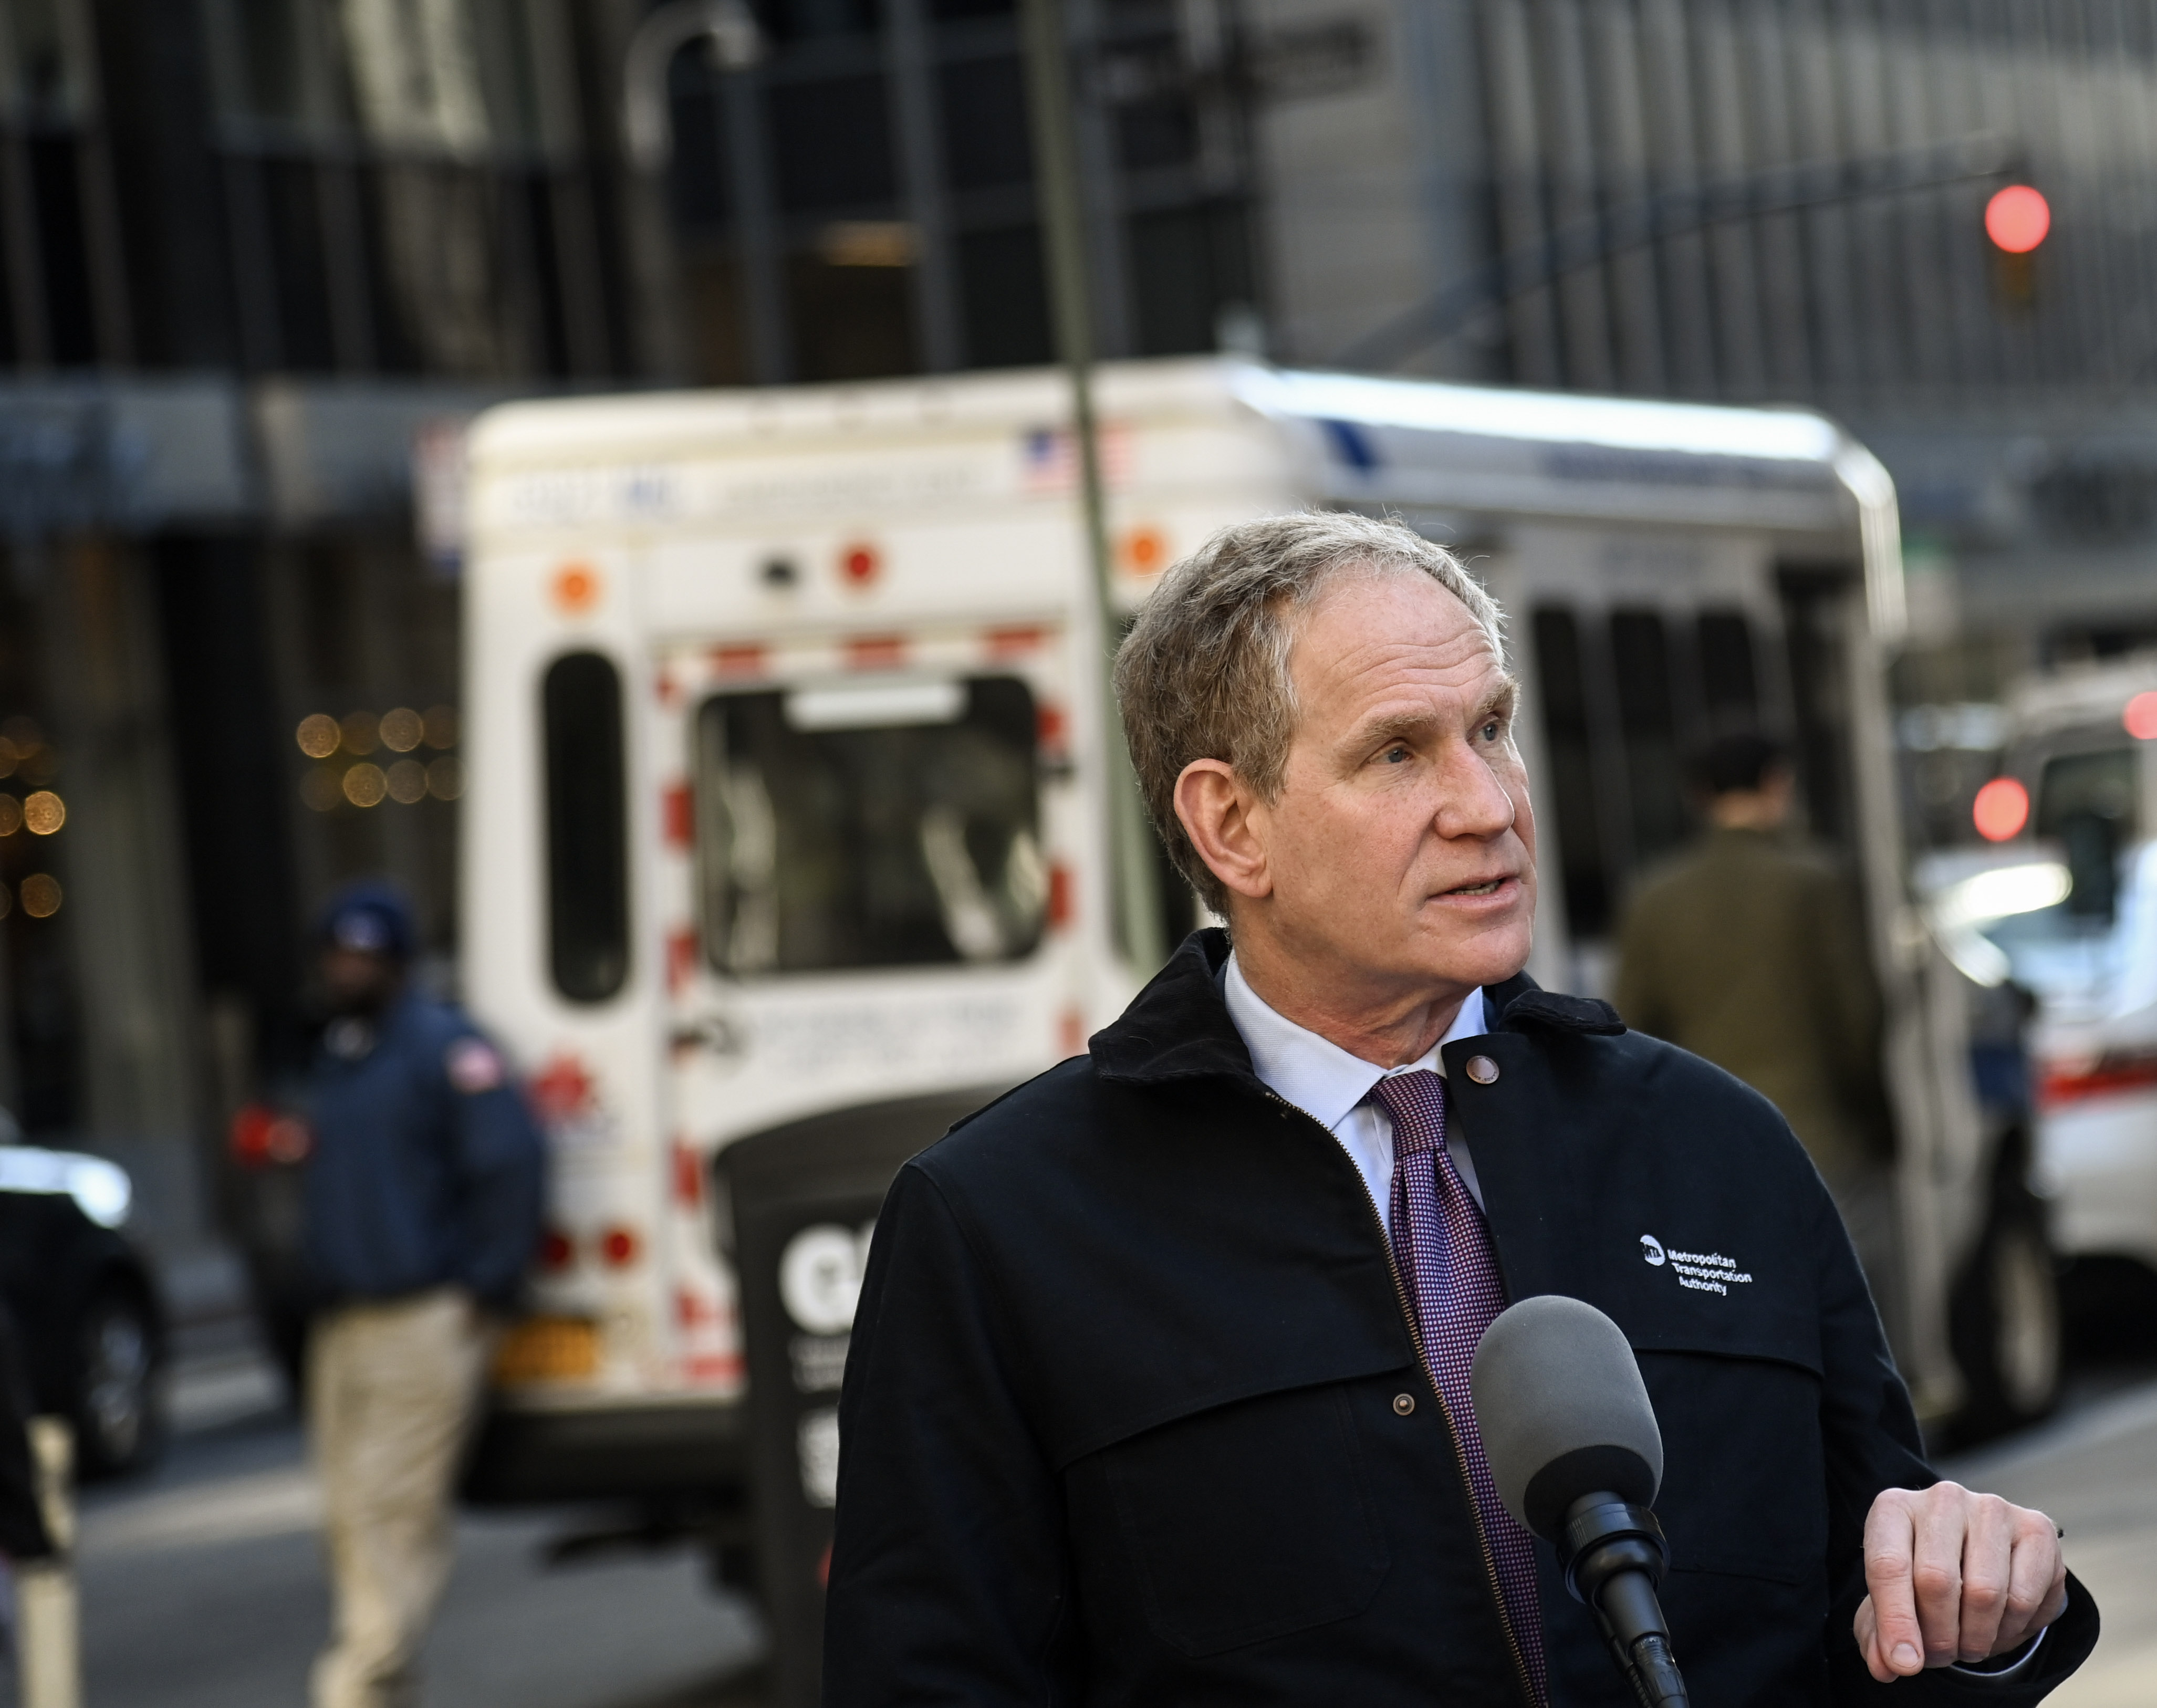 TRANSCRIPT: MTA Chair and CEO Lieber Appears Live on WBAI